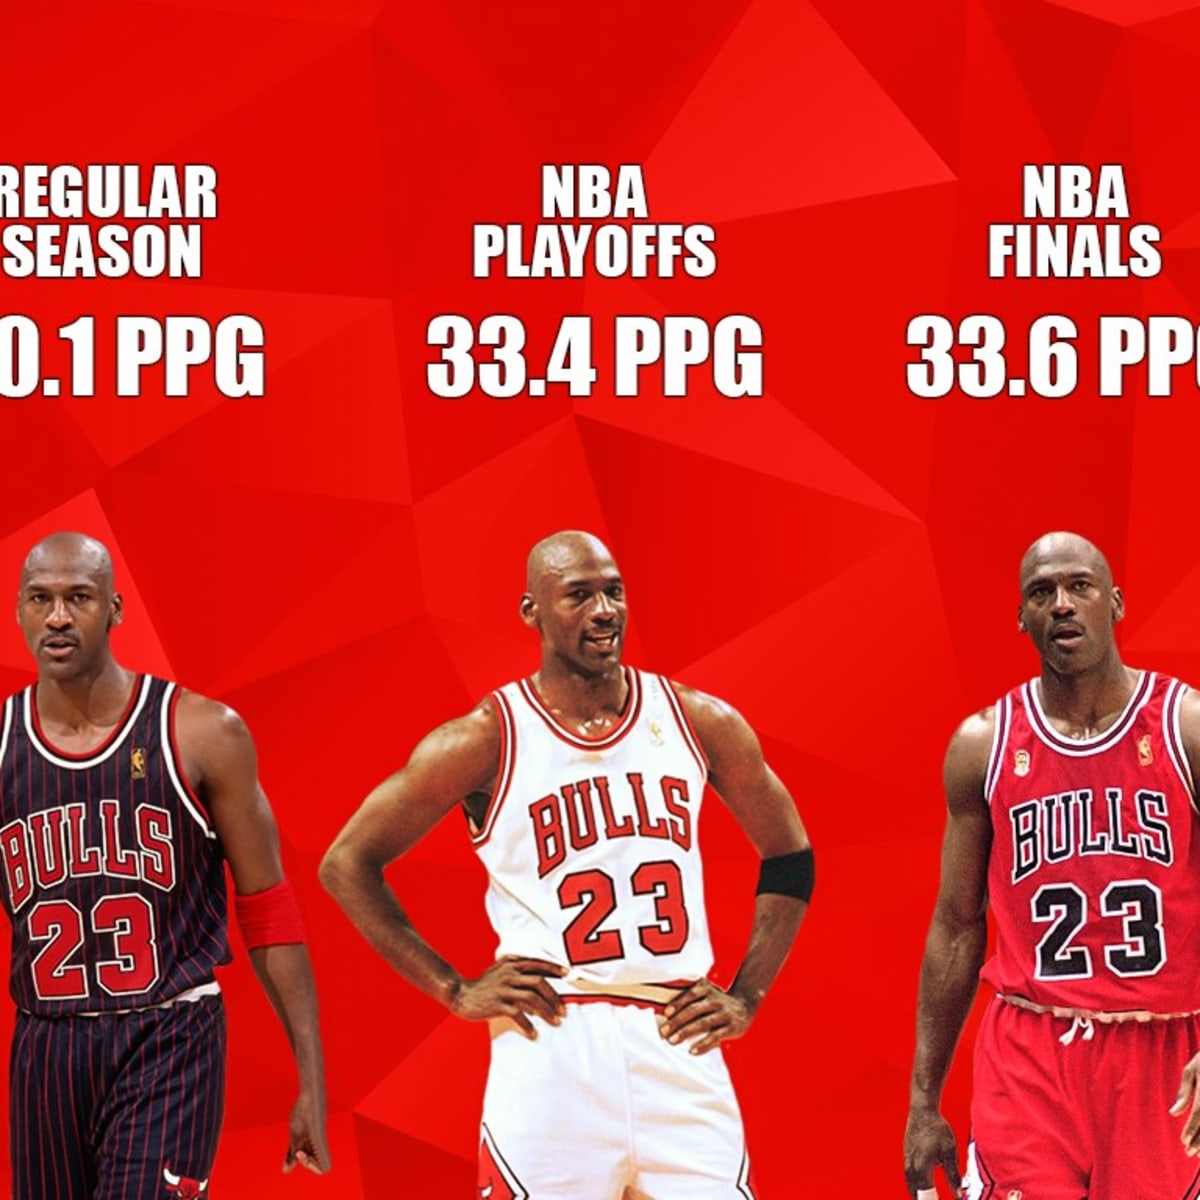 Michael Jordan's playoff-record 63 points isn't enough for Chicago Bulls